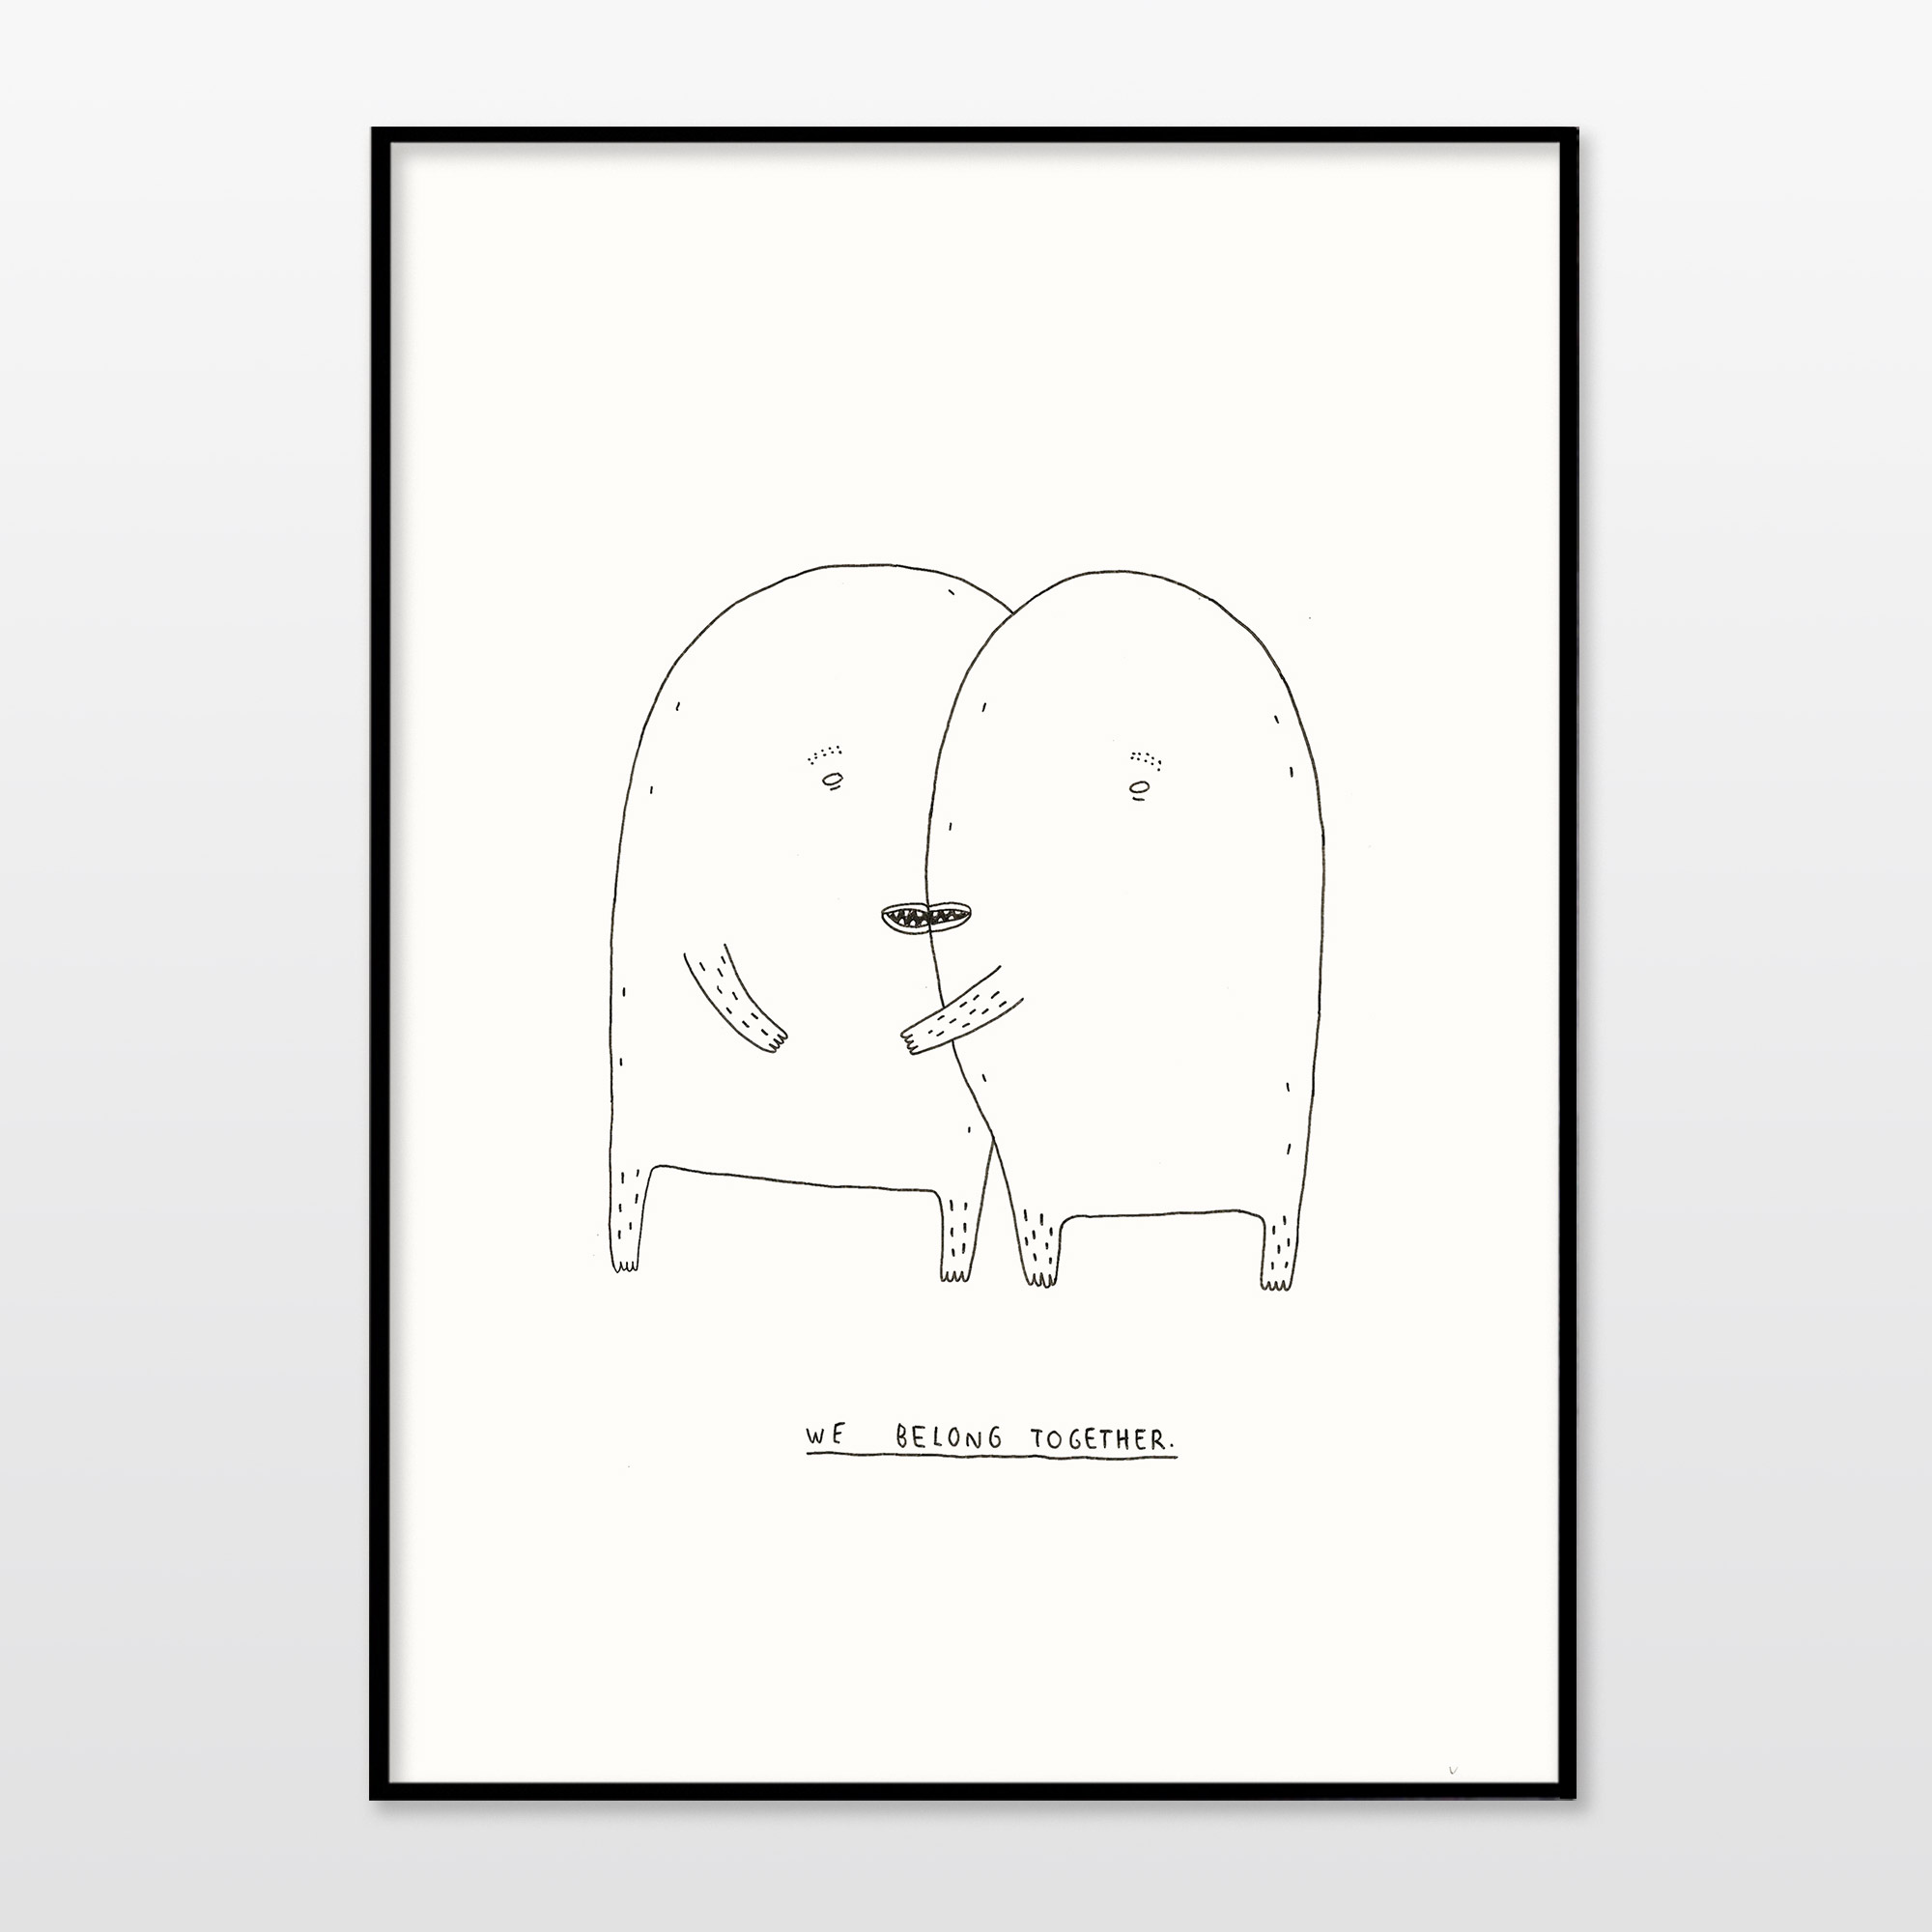 posters-prints, giclee-print, family-friendly, illustrative, minimalistic, children, moods, people, black, white, paper, black-and-white, cute, danish, design, interior, interior-design, love, modern, modern-art, nordic, posters, prints, scandinavien, Buy original high quality art. Paintings, drawings, limited edition prints & posters by talented artists.